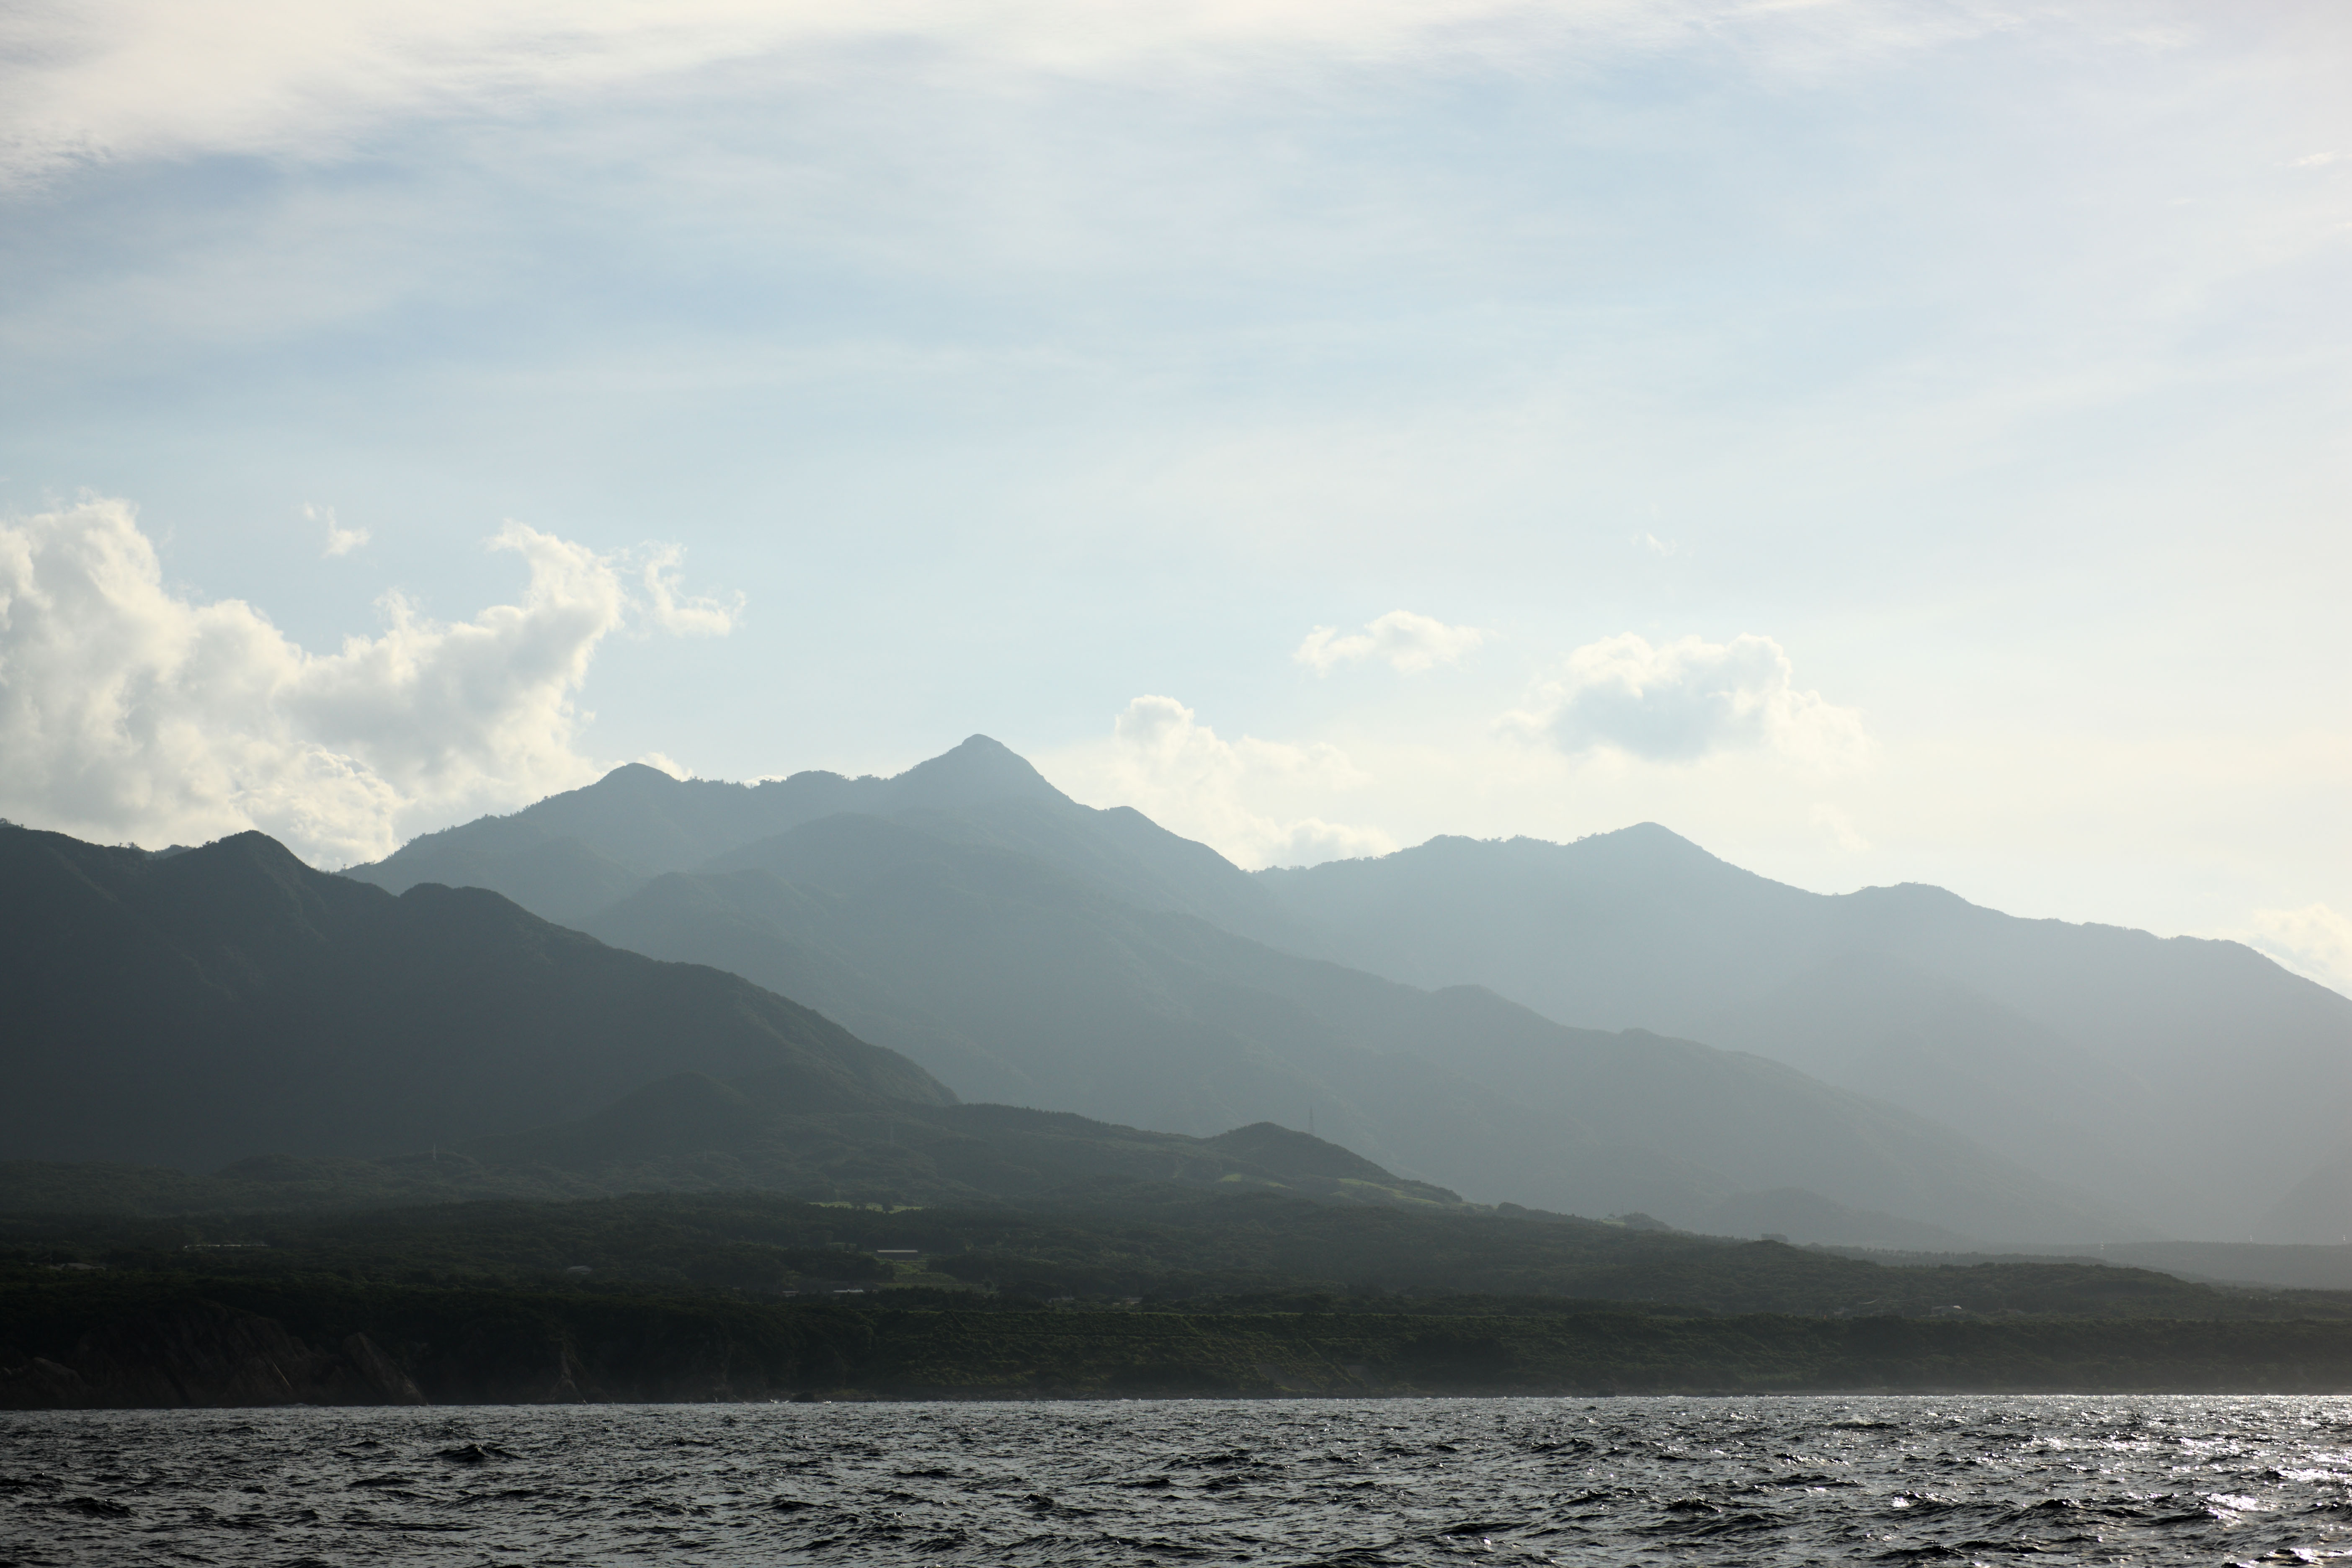 photo,material,free,landscape,picture,stock photo,Creative Commons,Yakushima, ridgeline, The sea, cliff, cloud